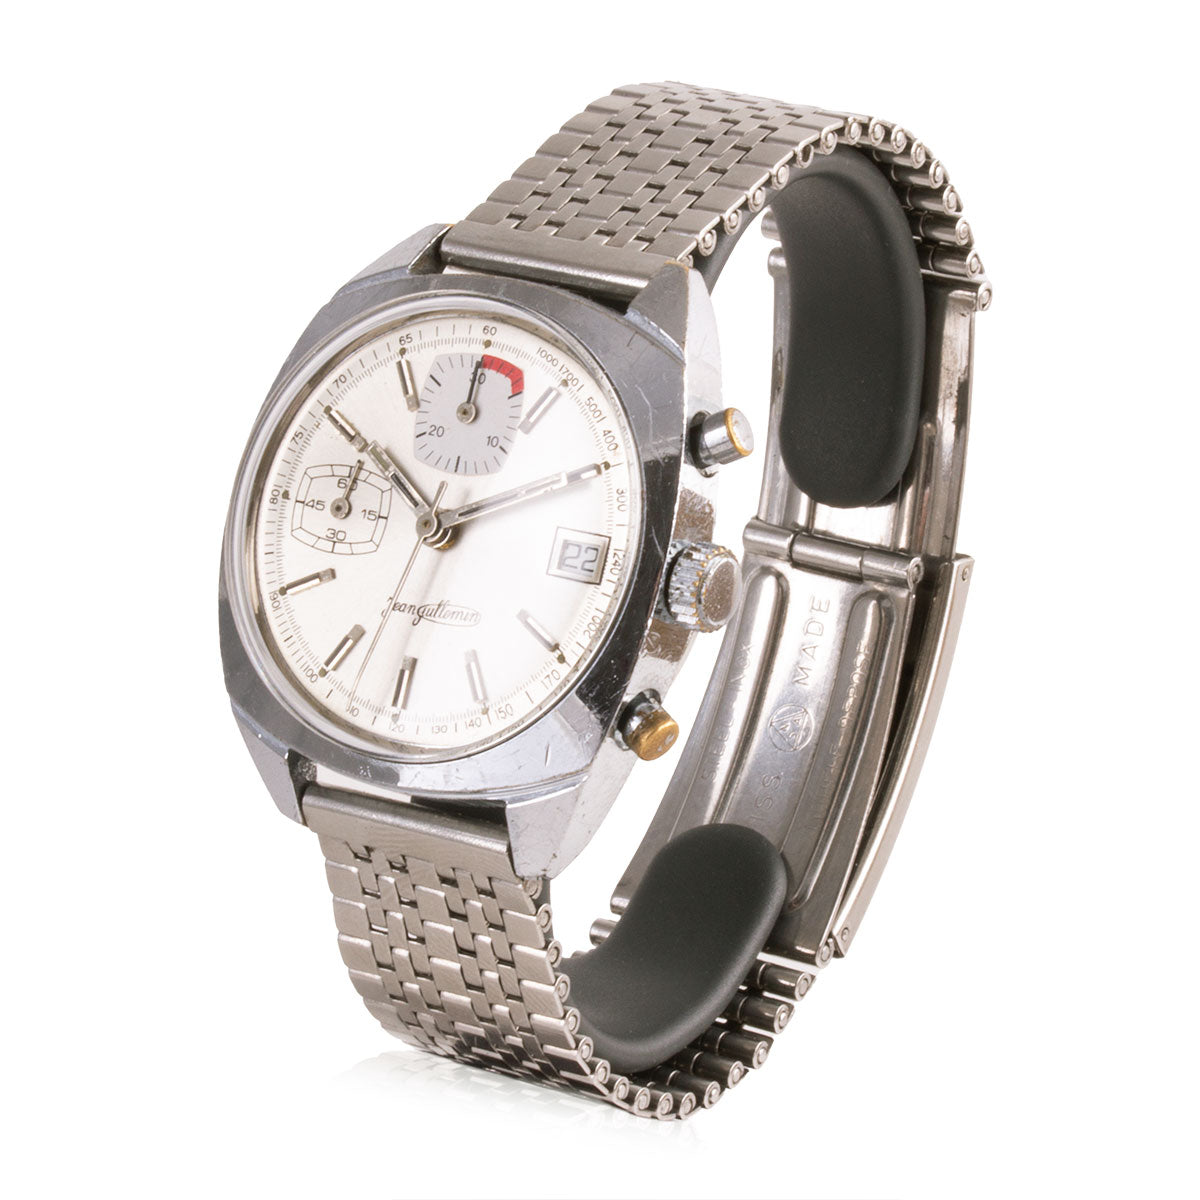 Second-hand watch - Jean Guillemin chronograph - 950€